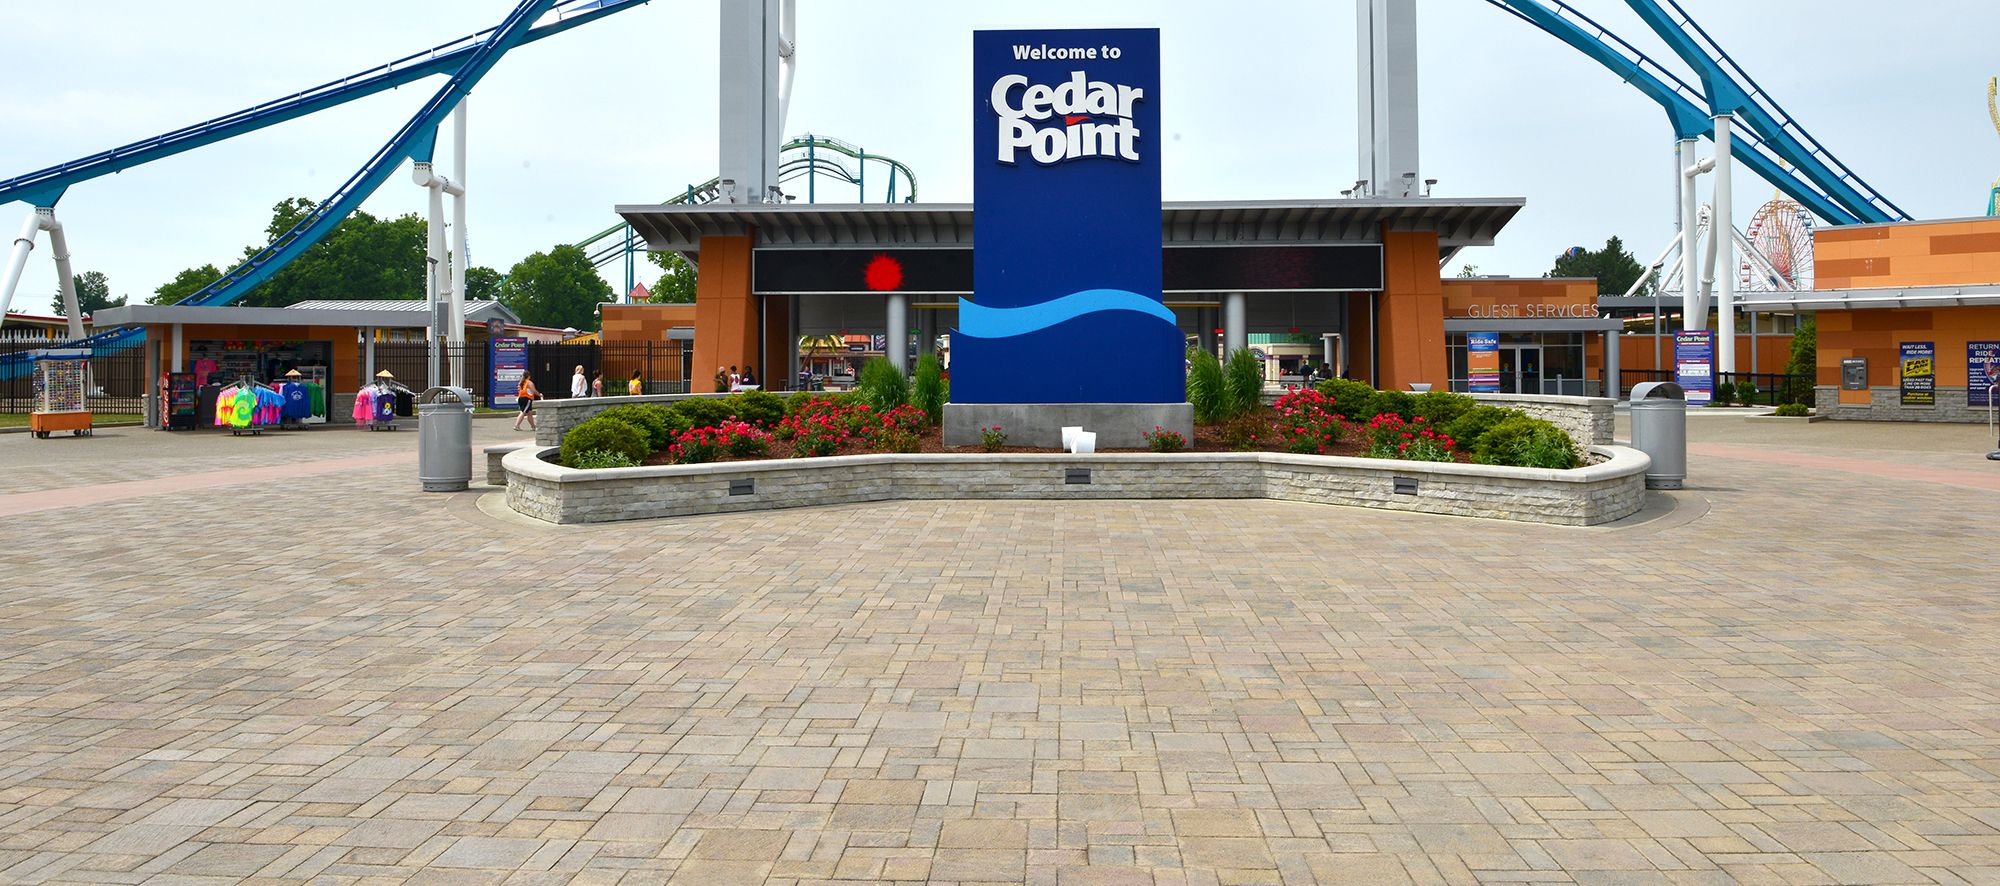 A large rollercoaster sits behind a retaining wall with lush softscaping featuring a large Cedar Point sign, over beige Il Campo pavers.